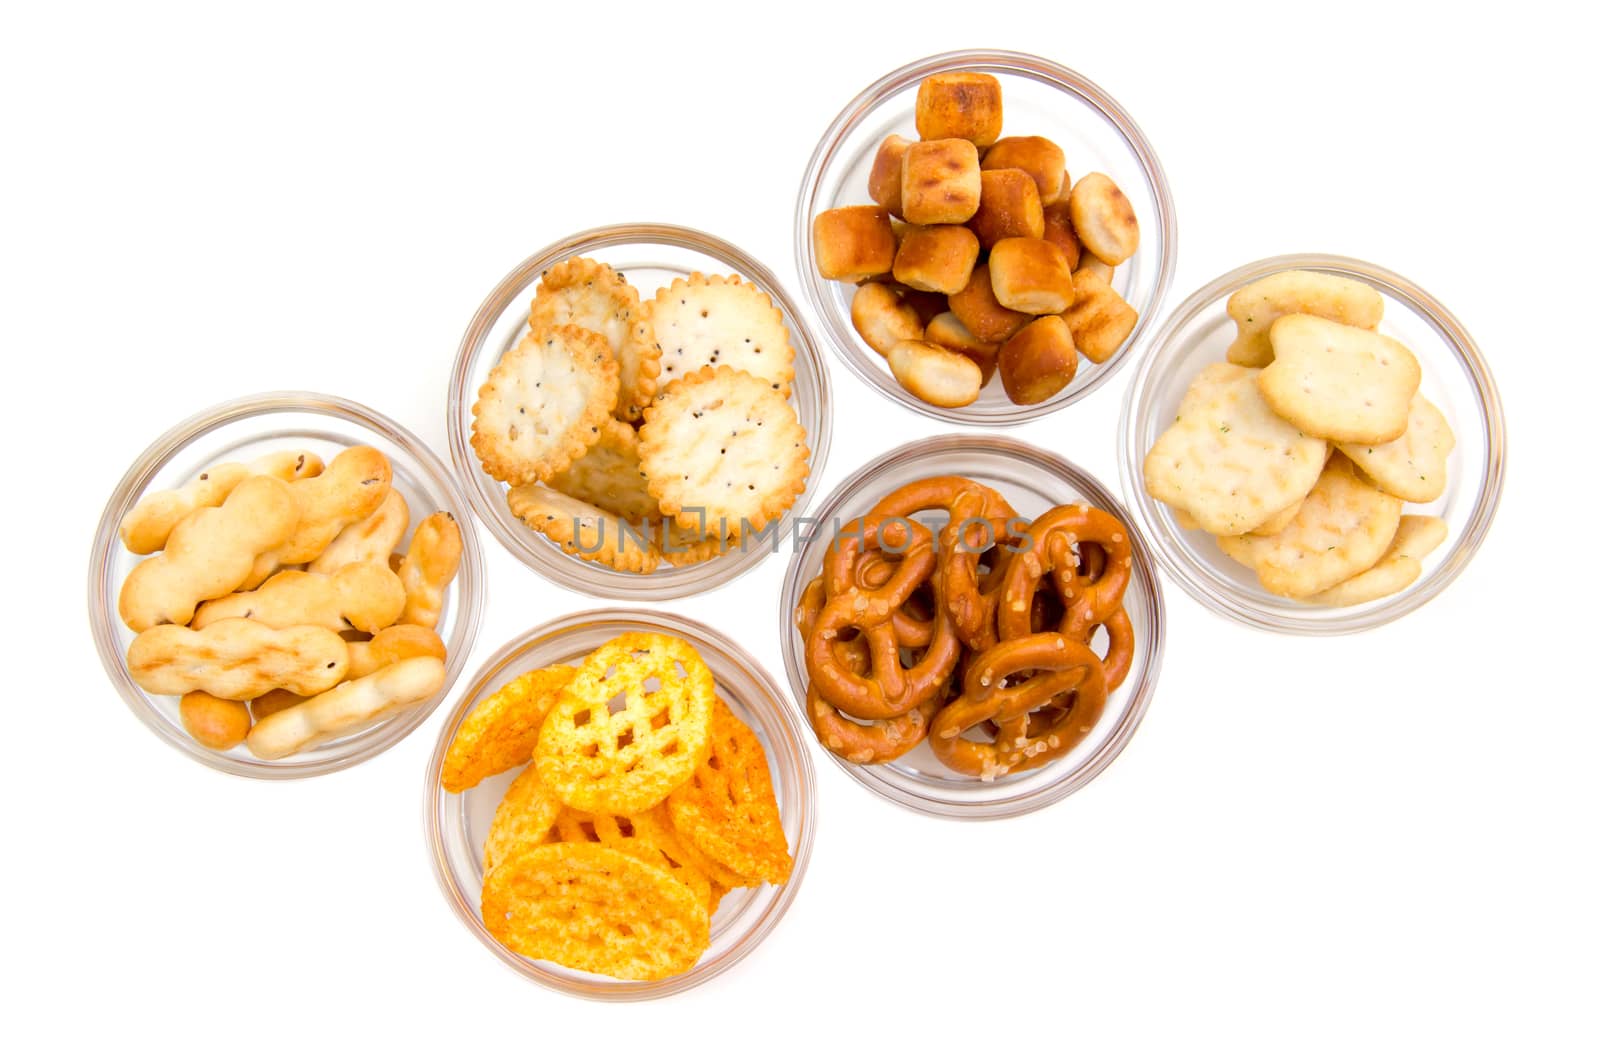 Pretzels on glass bowls on white background viewed from above